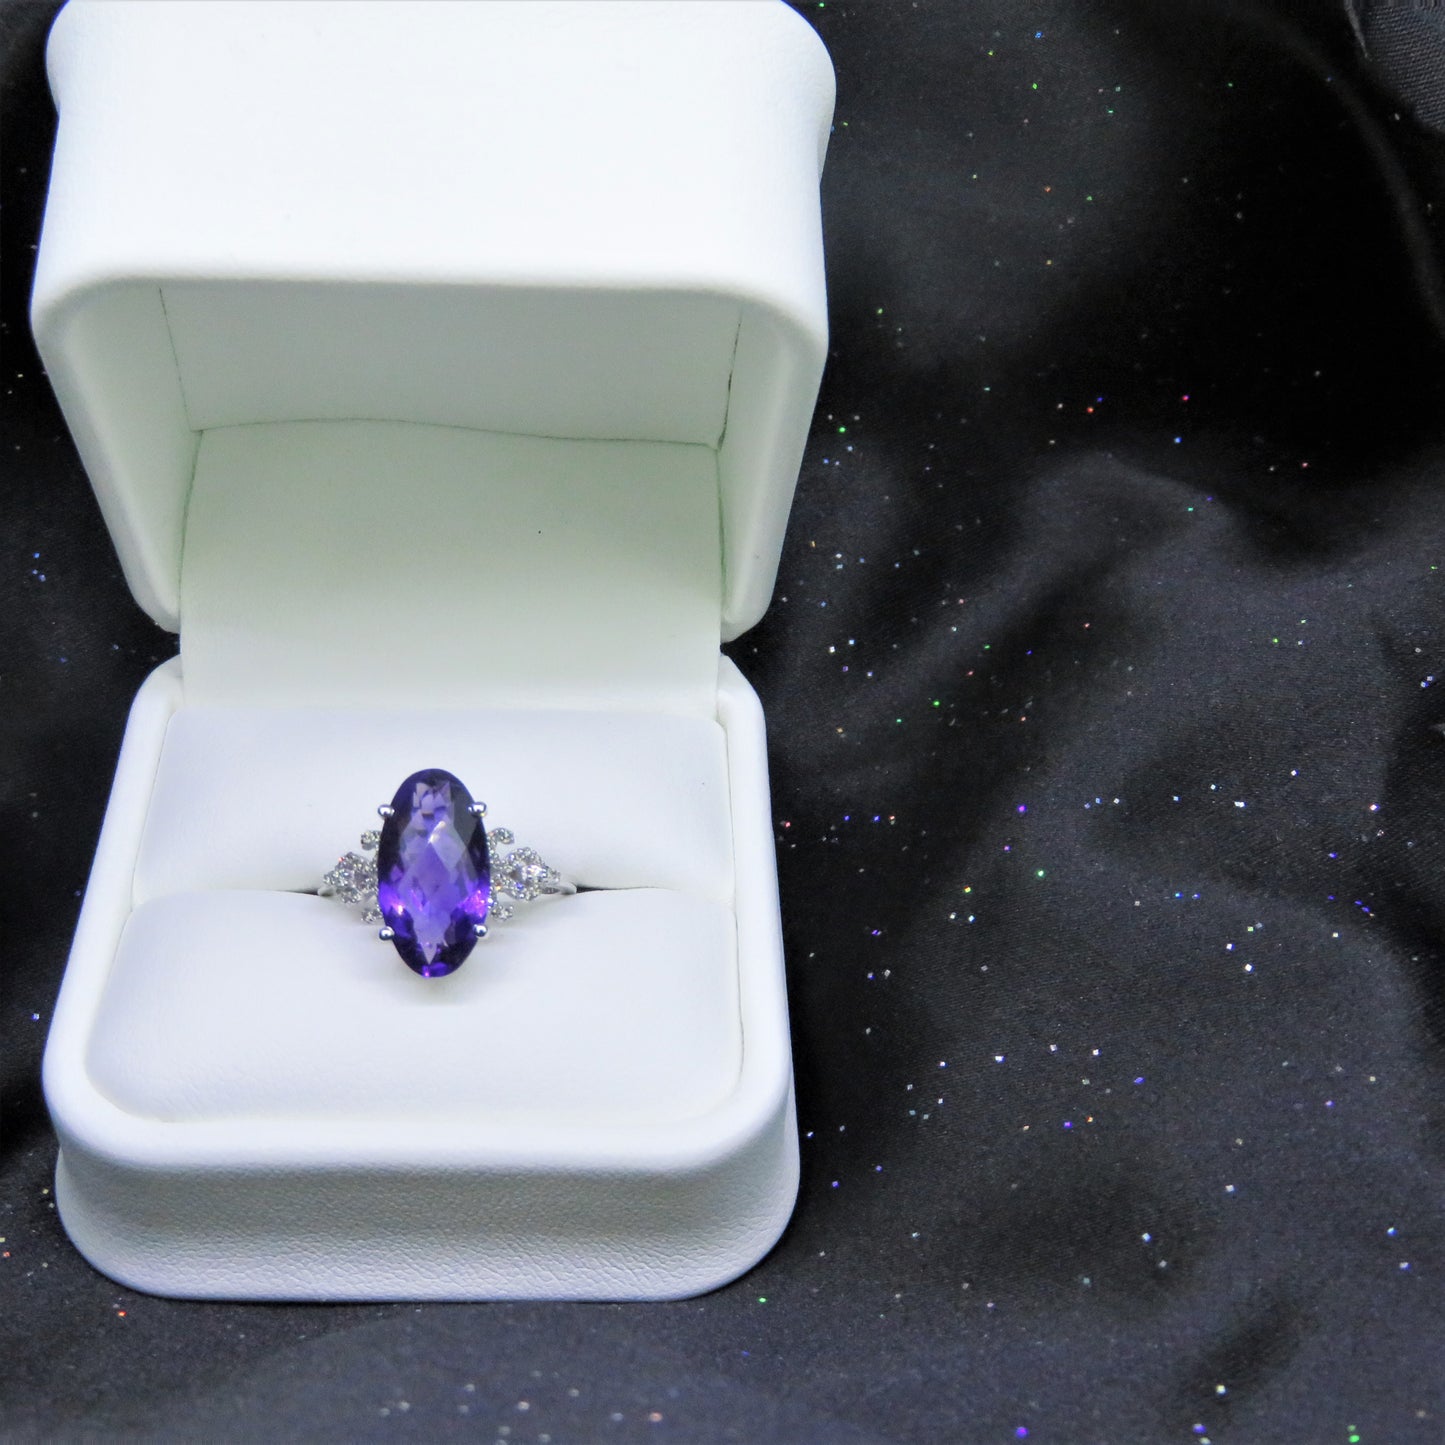 Oval Amethyst Ring with Diamonds